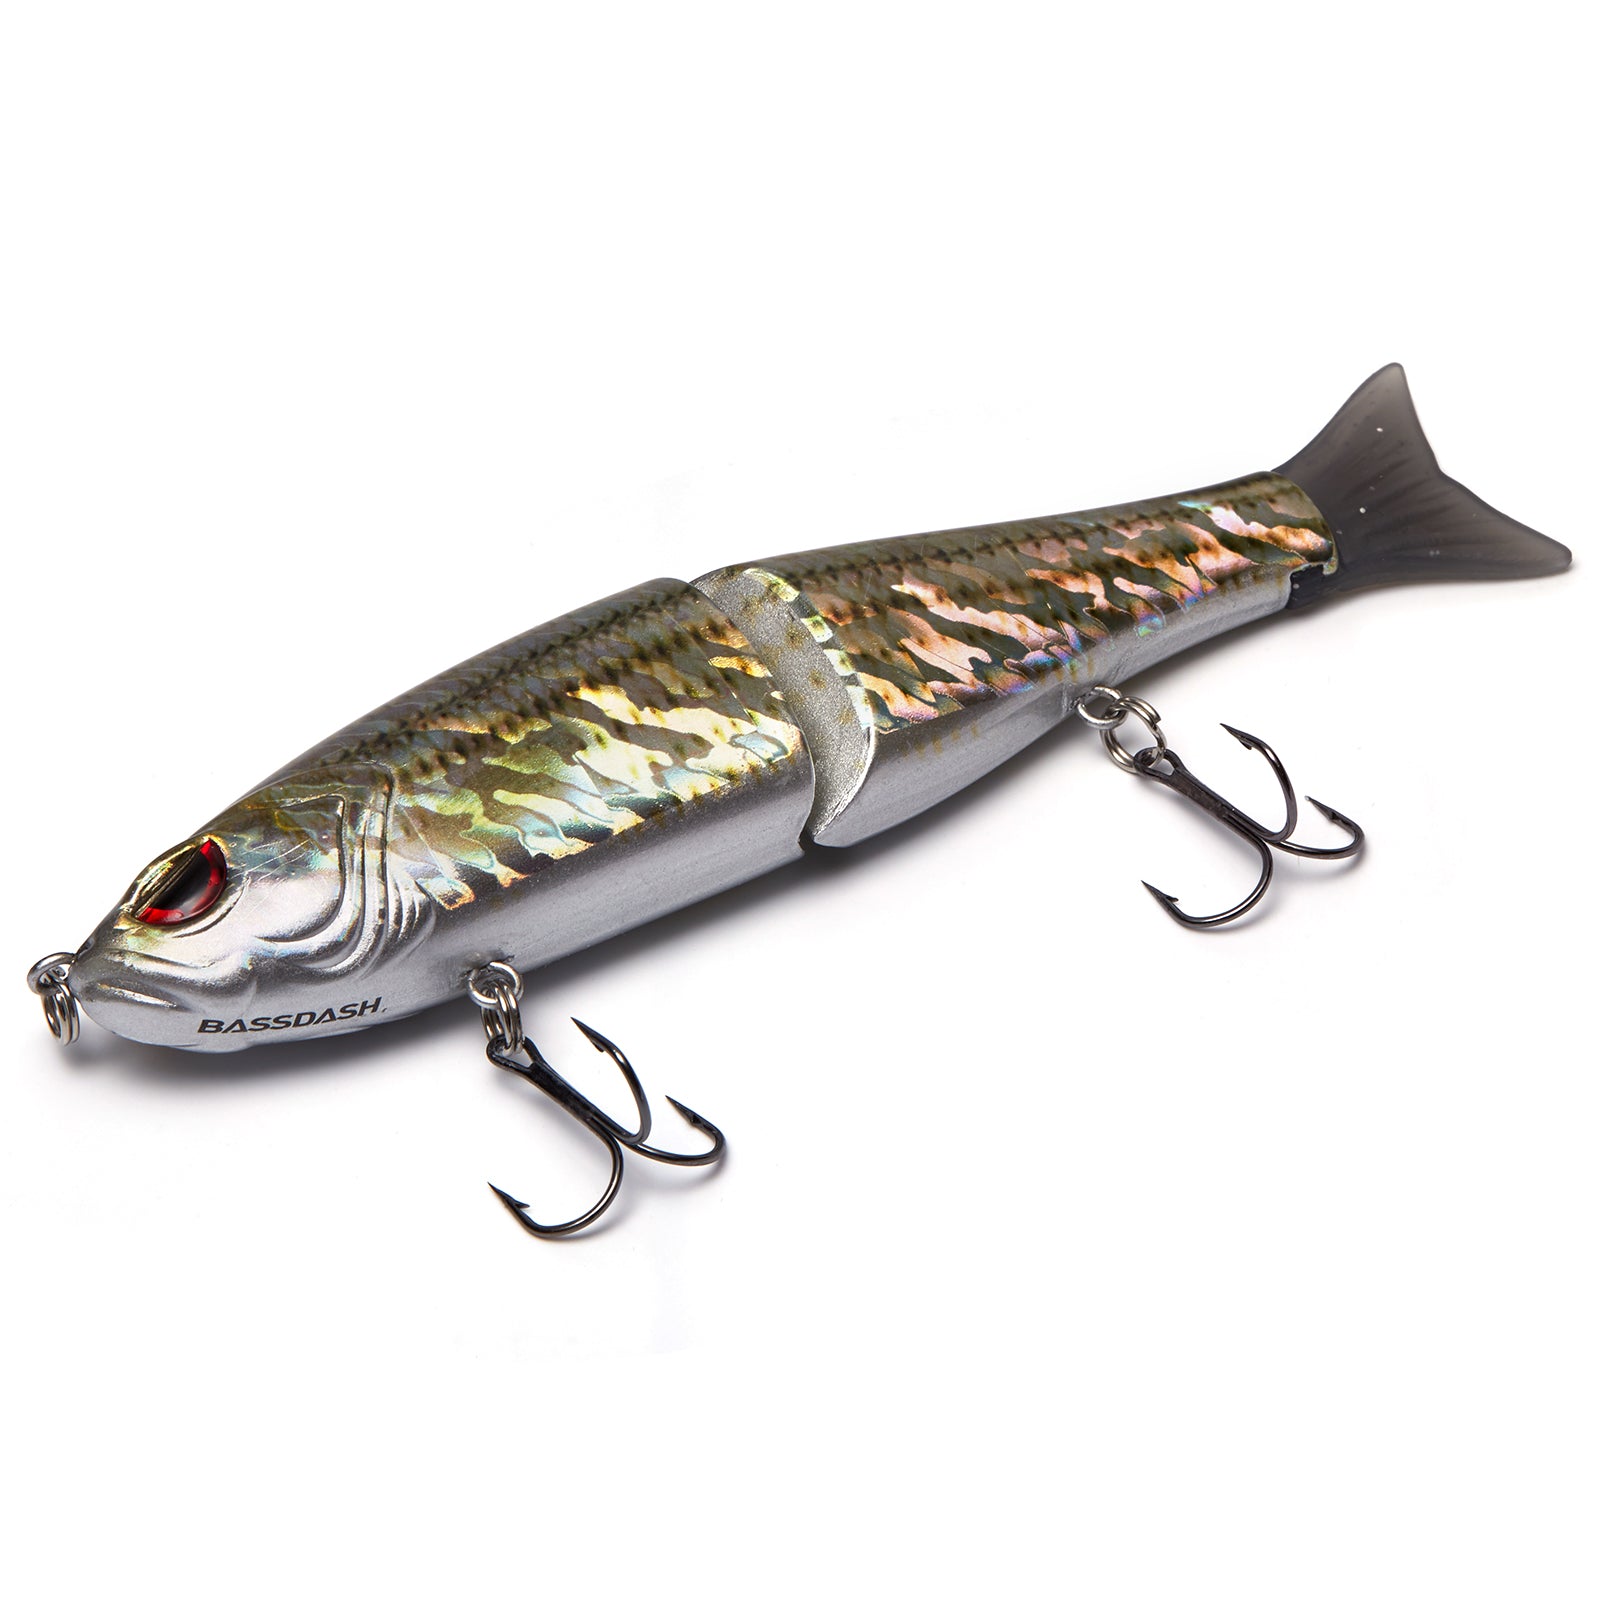  Bassdash SwimShad Glide Baits Jointed Swimbait Bass Pike Salmon  Trout Muskie Fishing Lure,3-Pack : Sports & Outdoors